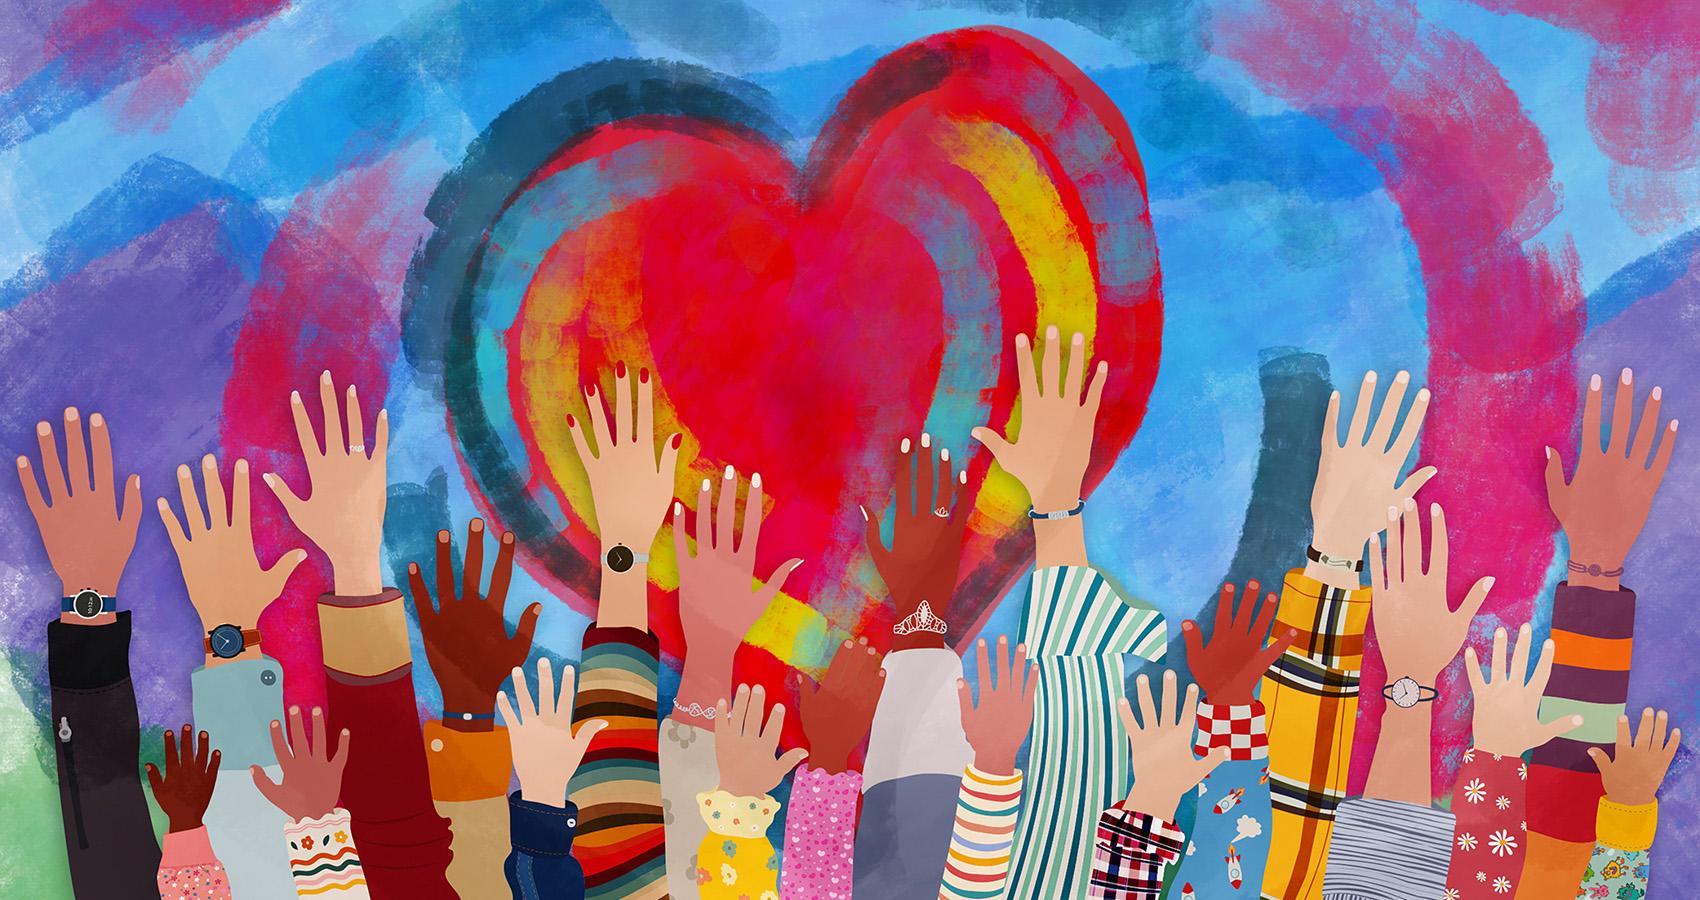 Painted illustration of hands and heart